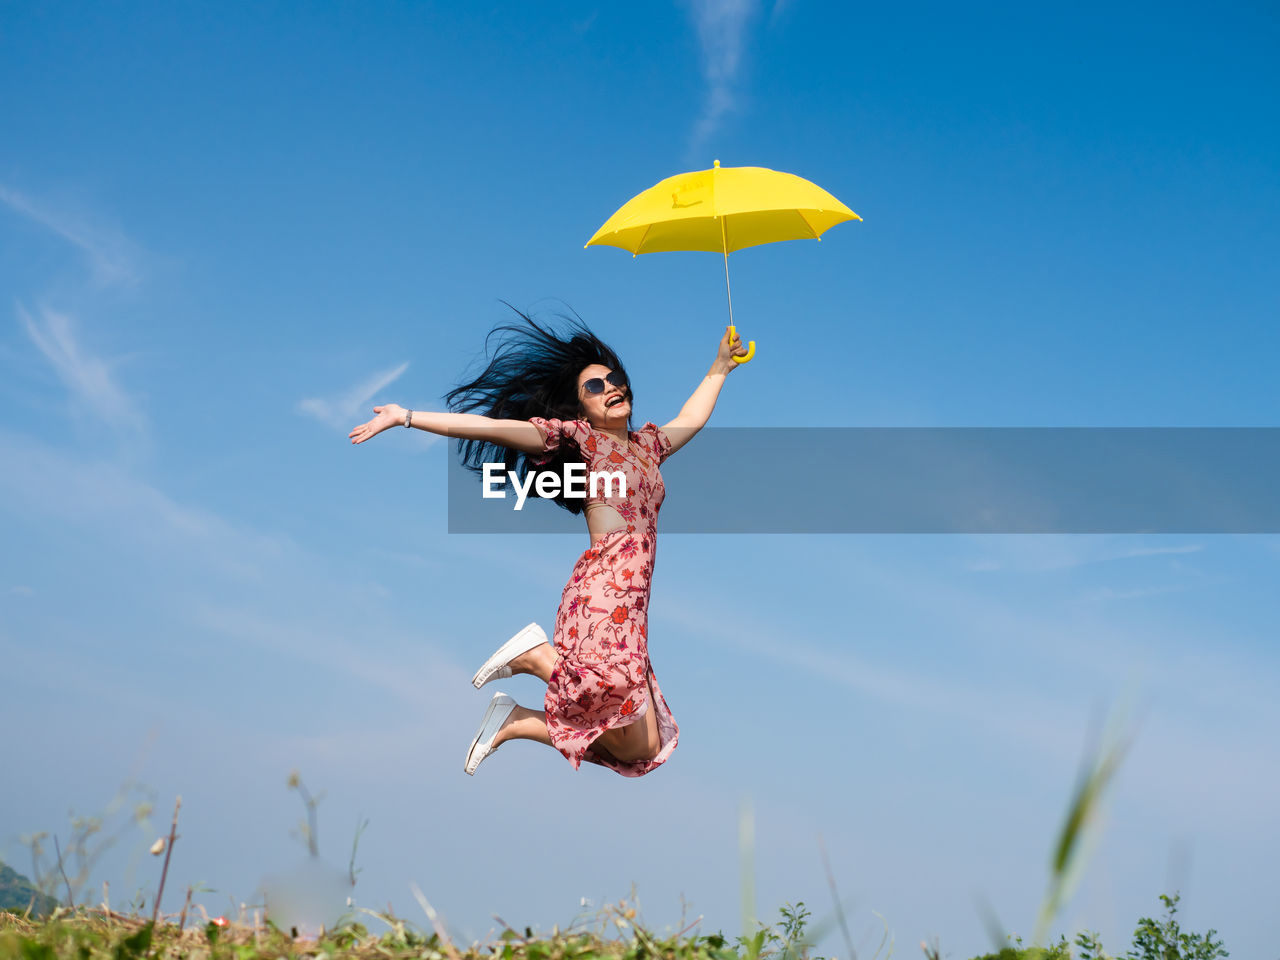 Woman jumping while holding umbrella against sky